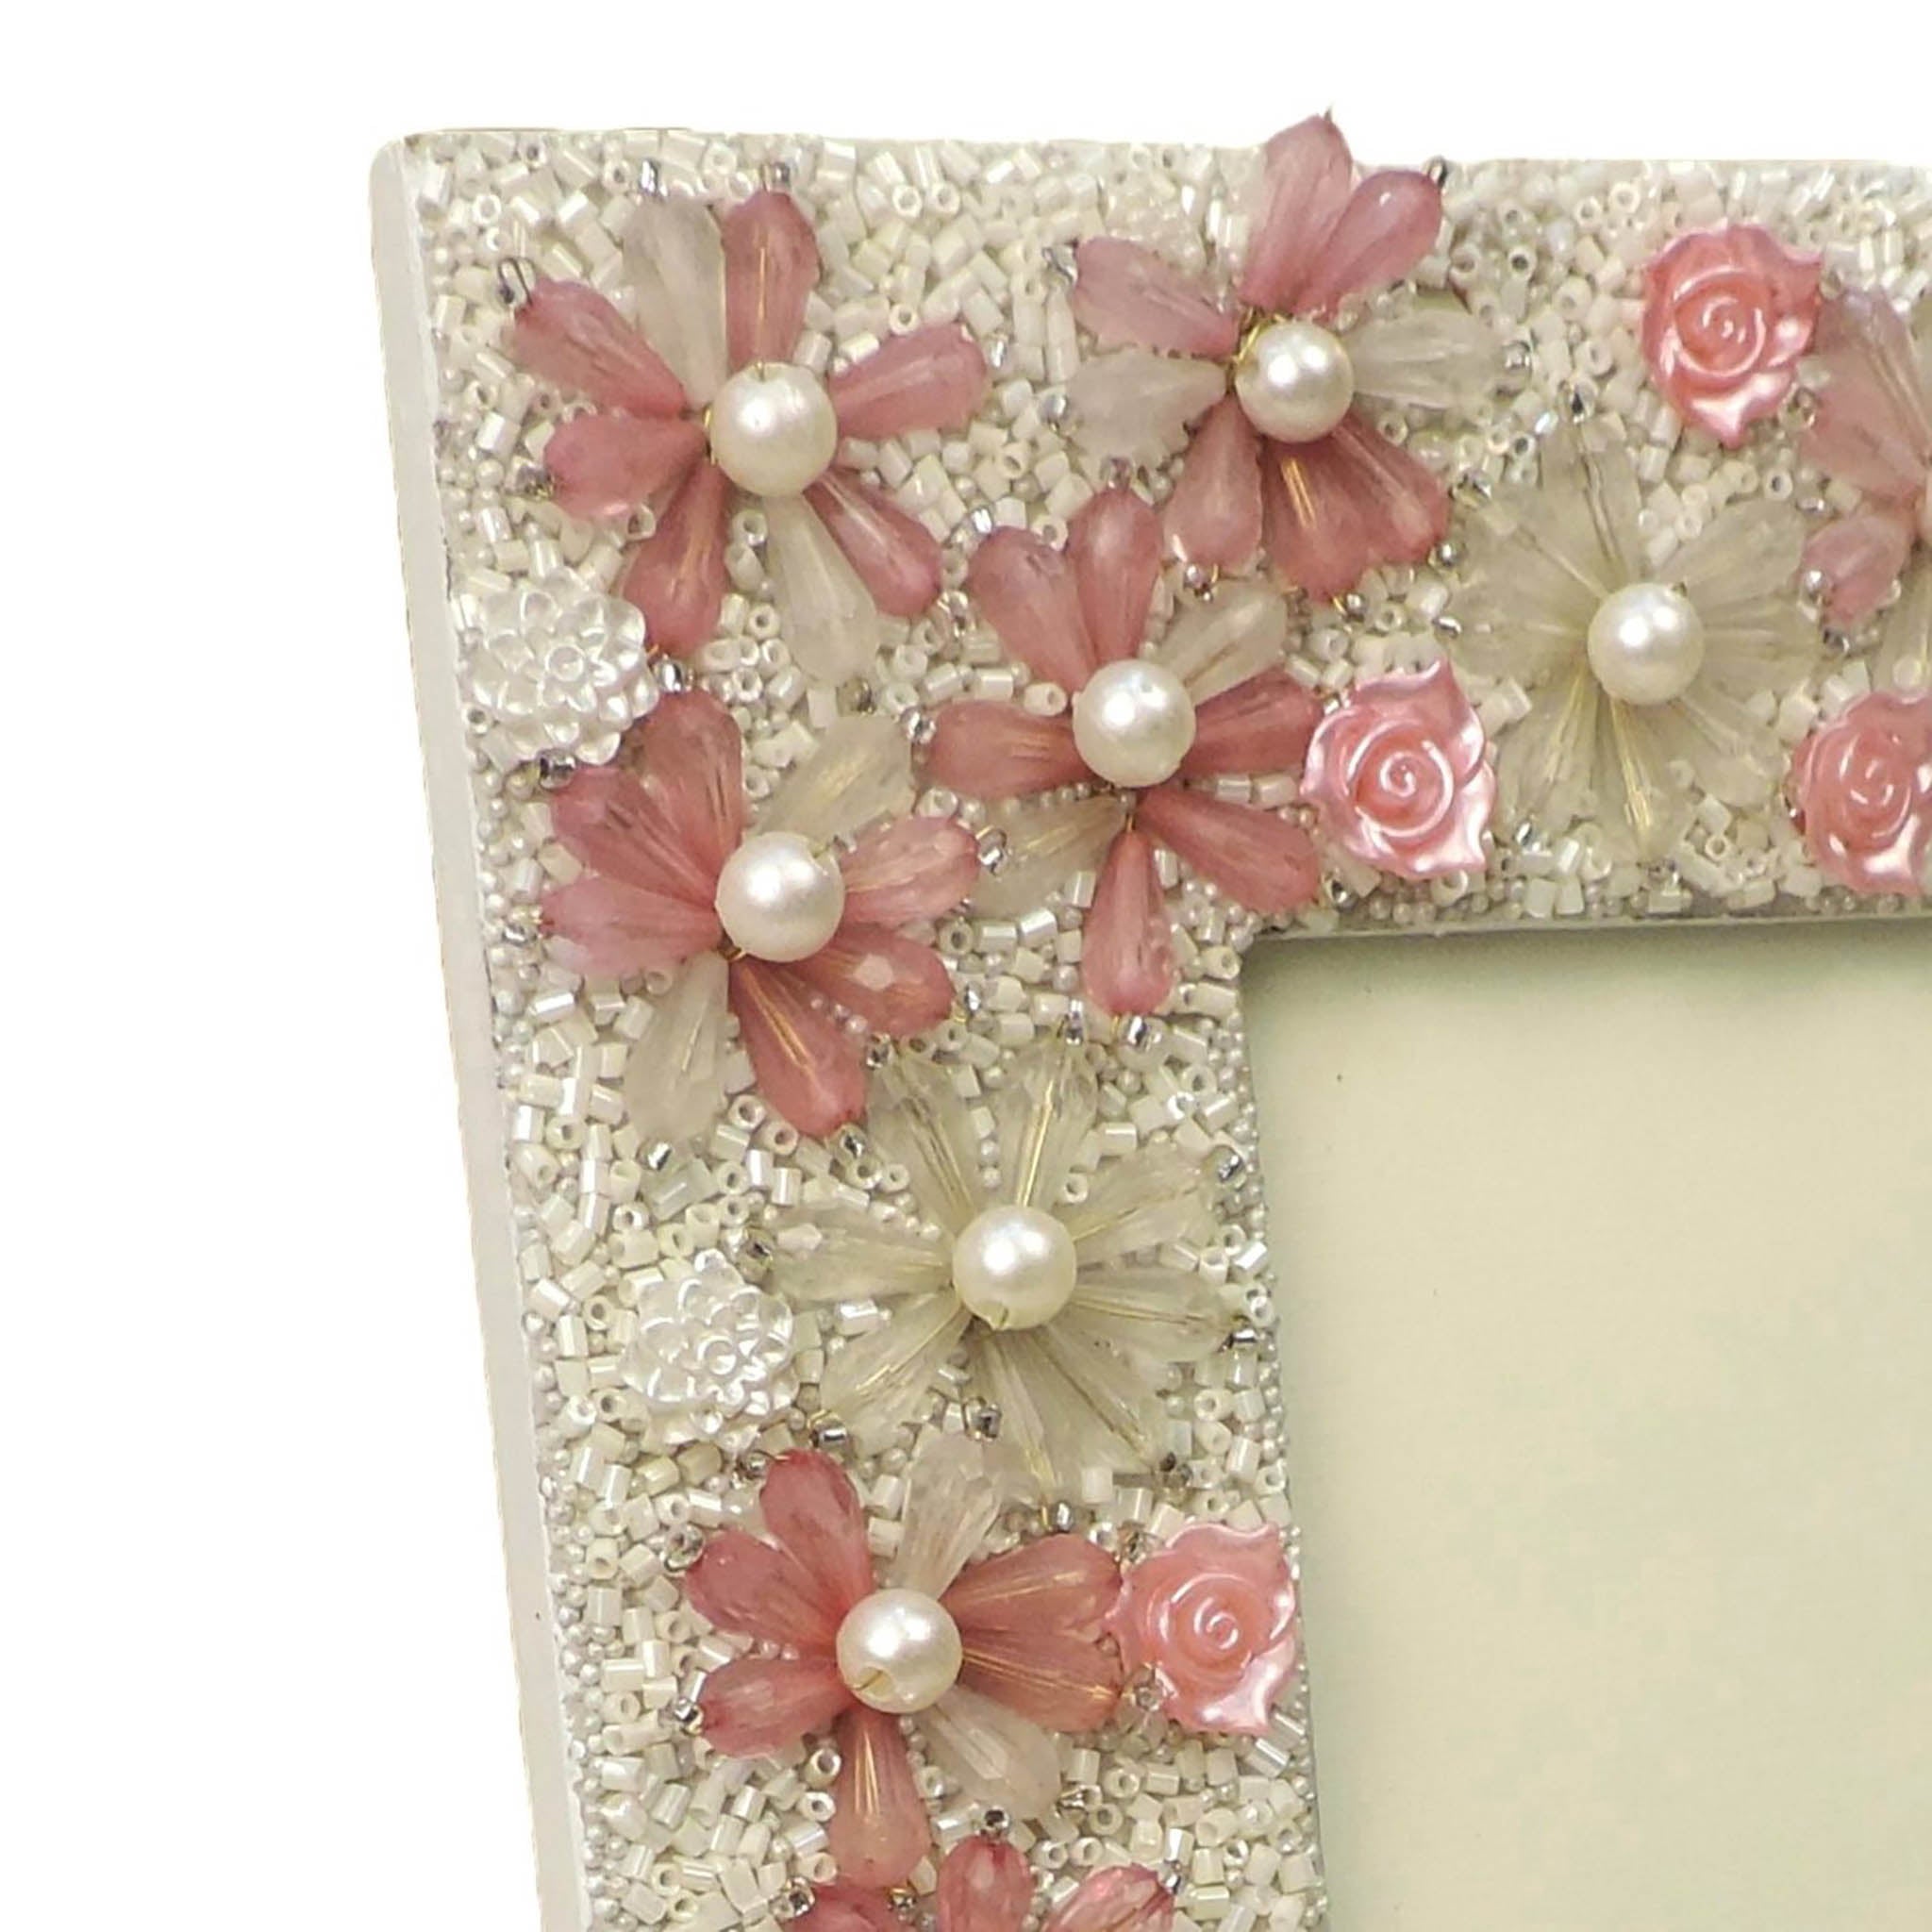 Floral Beaded Photo Frame in White Pink